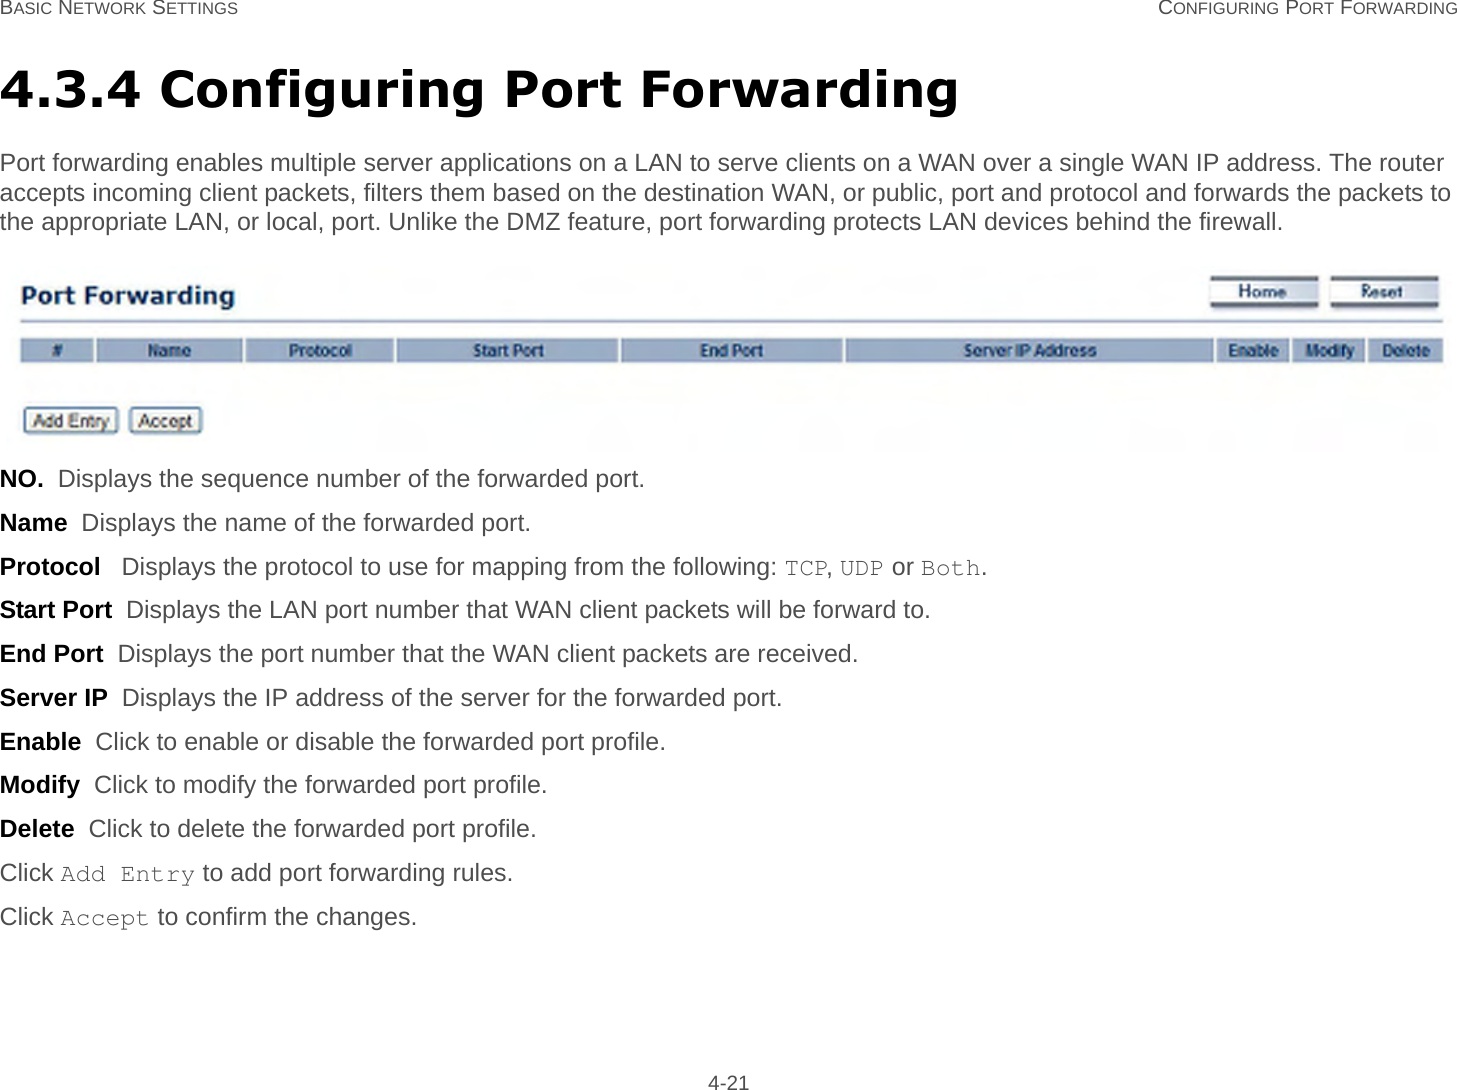 BASIC NETWORK SETTINGS CONFIGURING PORT FORWARDING 4-214.3.4 Configuring Port ForwardingPort forwarding enables multiple server applications on a LAN to serve clients on a WAN over a single WAN IP address. The router accepts incoming client packets, filters them based on the destination WAN, or public, port and protocol and forwards the packets to the appropriate LAN, or local, port. Unlike the DMZ feature, port forwarding protects LAN devices behind the firewall.NO.  Displays the sequence number of the forwarded port.Name  Displays the name of the forwarded port.Protocol   Displays the protocol to use for mapping from the following: TCP, UDP or Both.Start Port  Displays the LAN port number that WAN client packets will be forward to.End Port  Displays the port number that the WAN client packets are received.Server IP  Displays the IP address of the server for the forwarded port.Enable  Click to enable or disable the forwarded port profile.Modify  Click to modify the forwarded port profile.Delete  Click to delete the forwarded port profile.Click Add Entry to add port forwarding rules.Click Accept to confirm the changes.